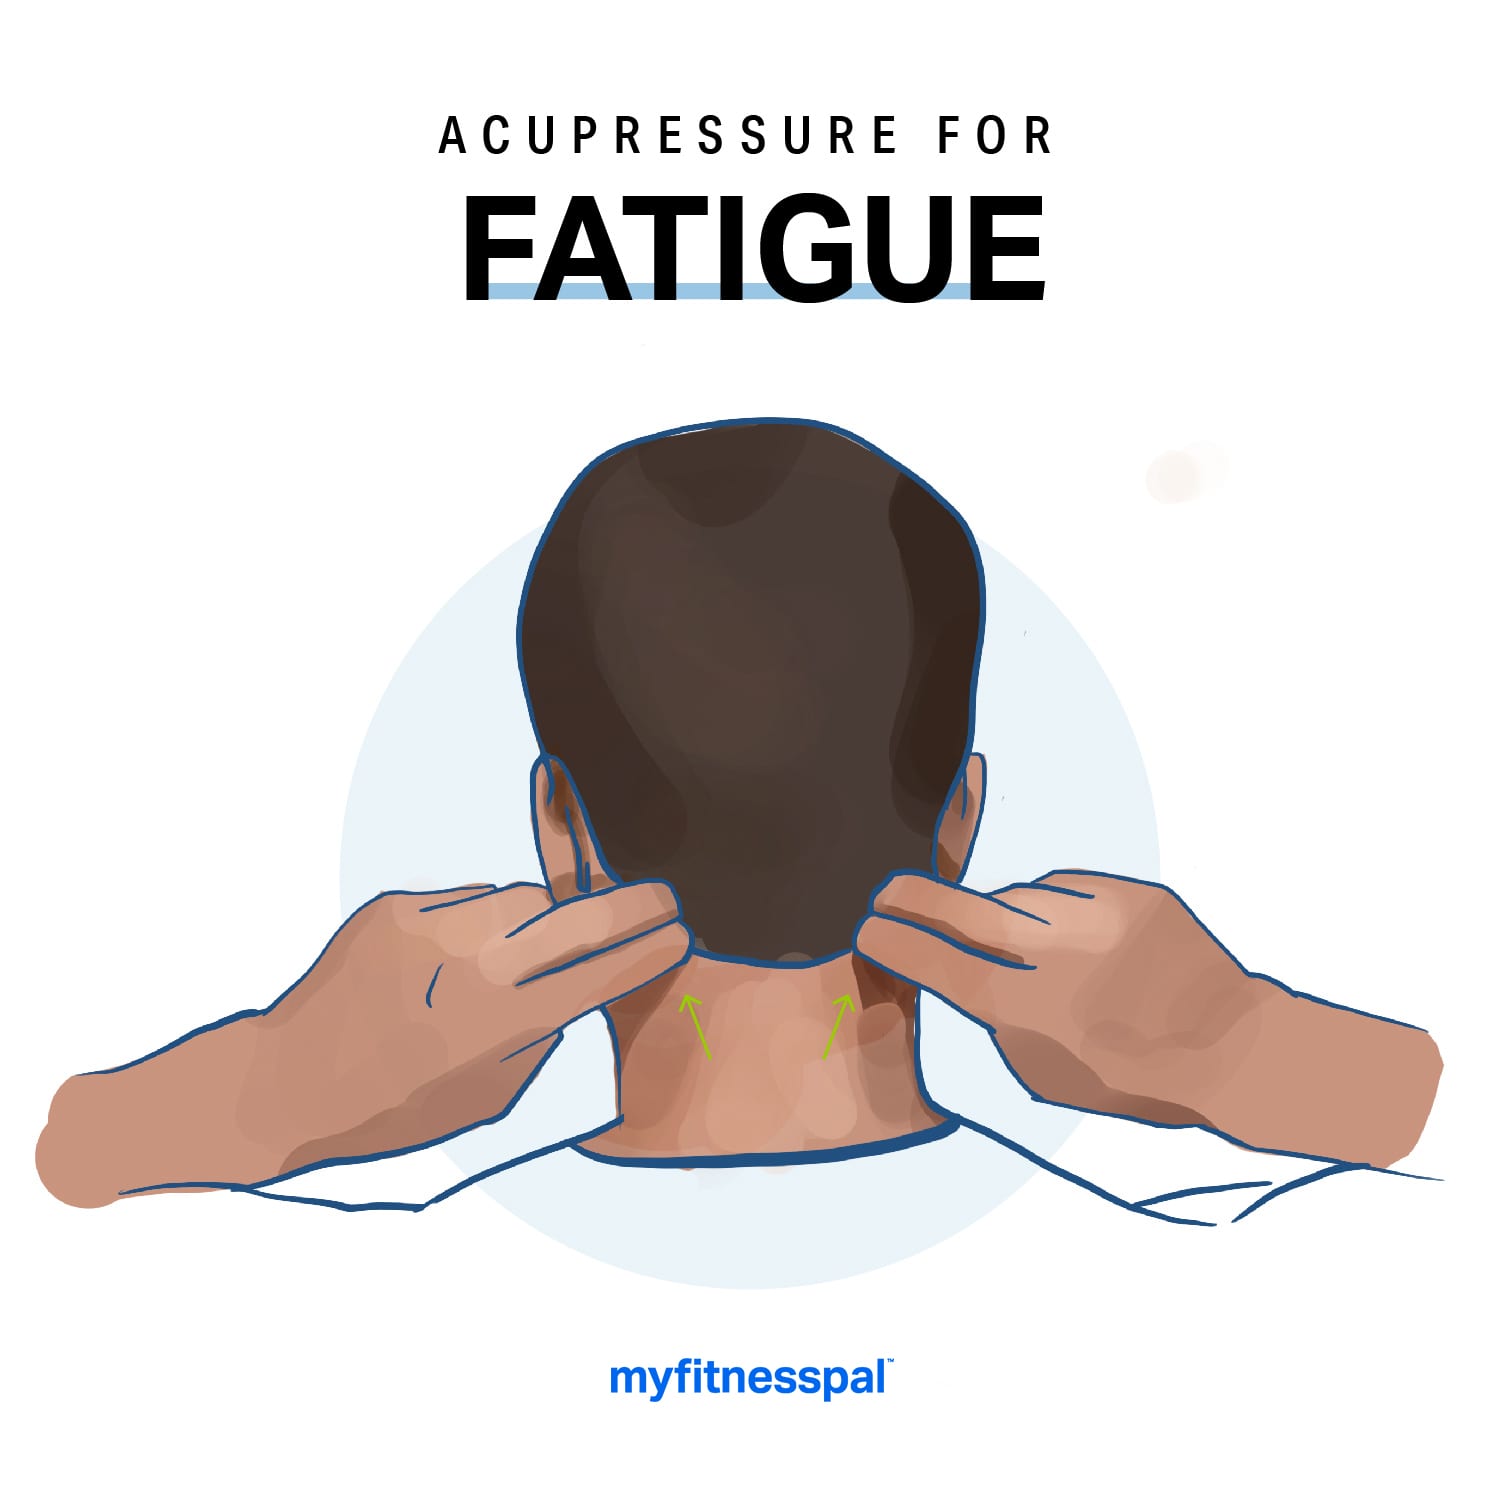 3 Acupressure Techniques to Make You Feel Better | Wellness | MyFitnessPal